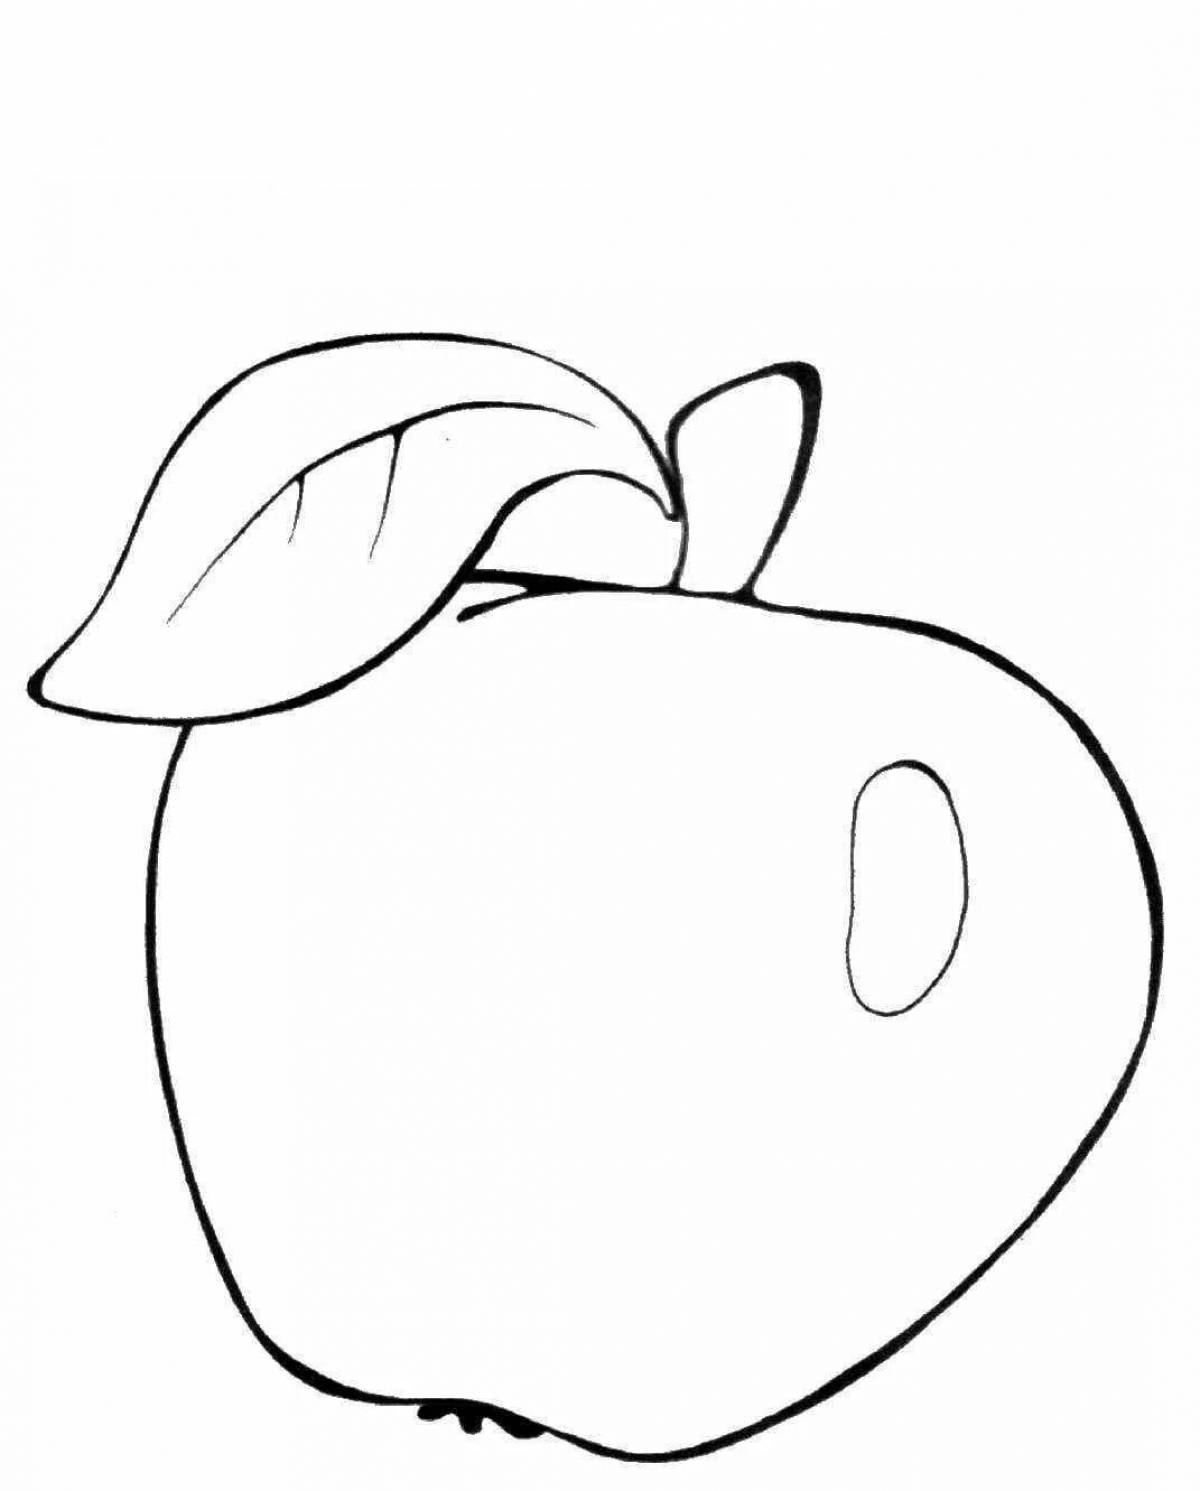 Coloring book with a cheerful apple pattern